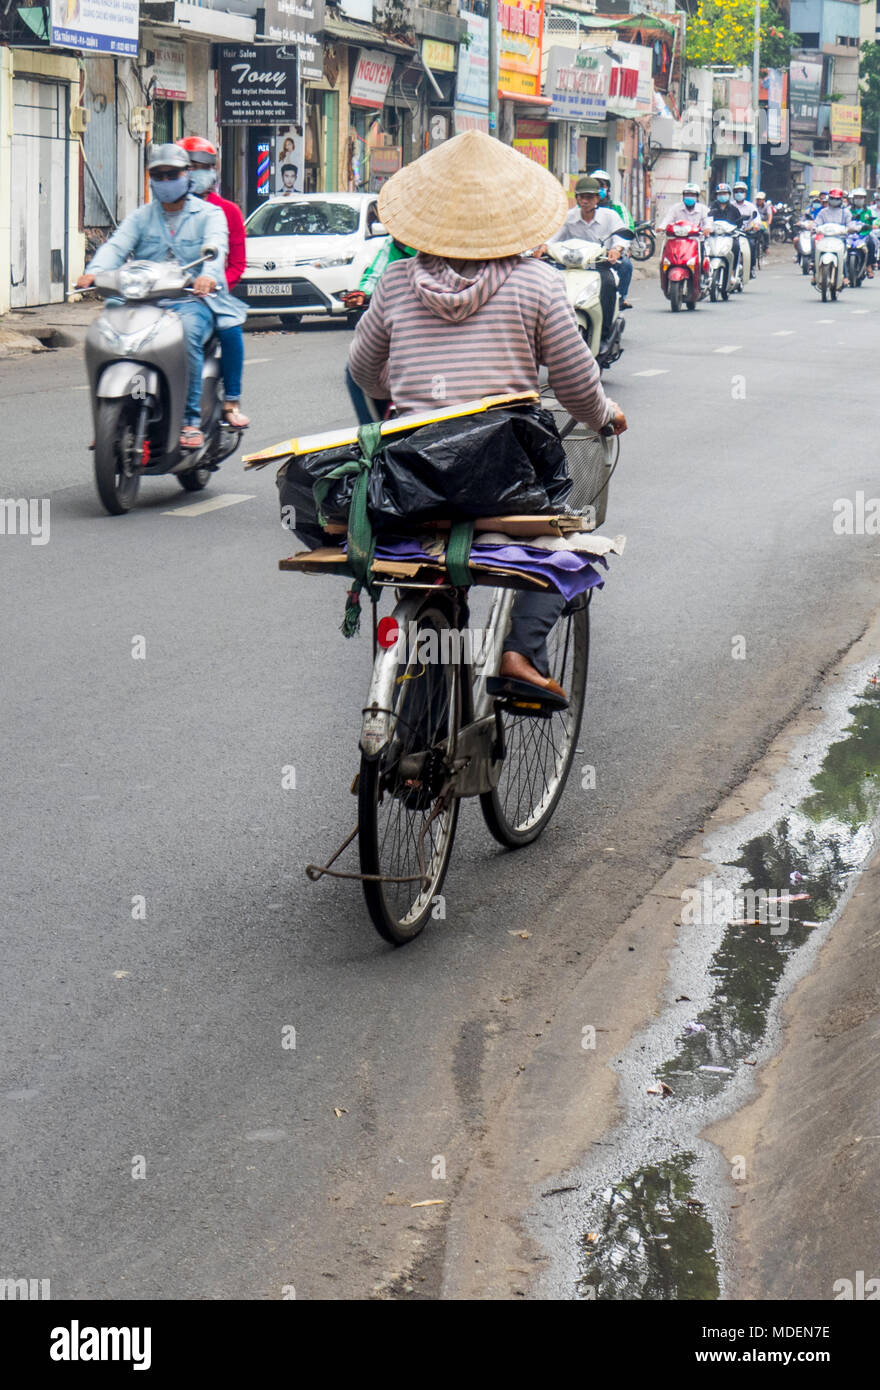 A Vietnamese female cyclist wearing a conical hat riding her bicycle on a street in Ho Chi Minh City, Vietnam. Stock Photo